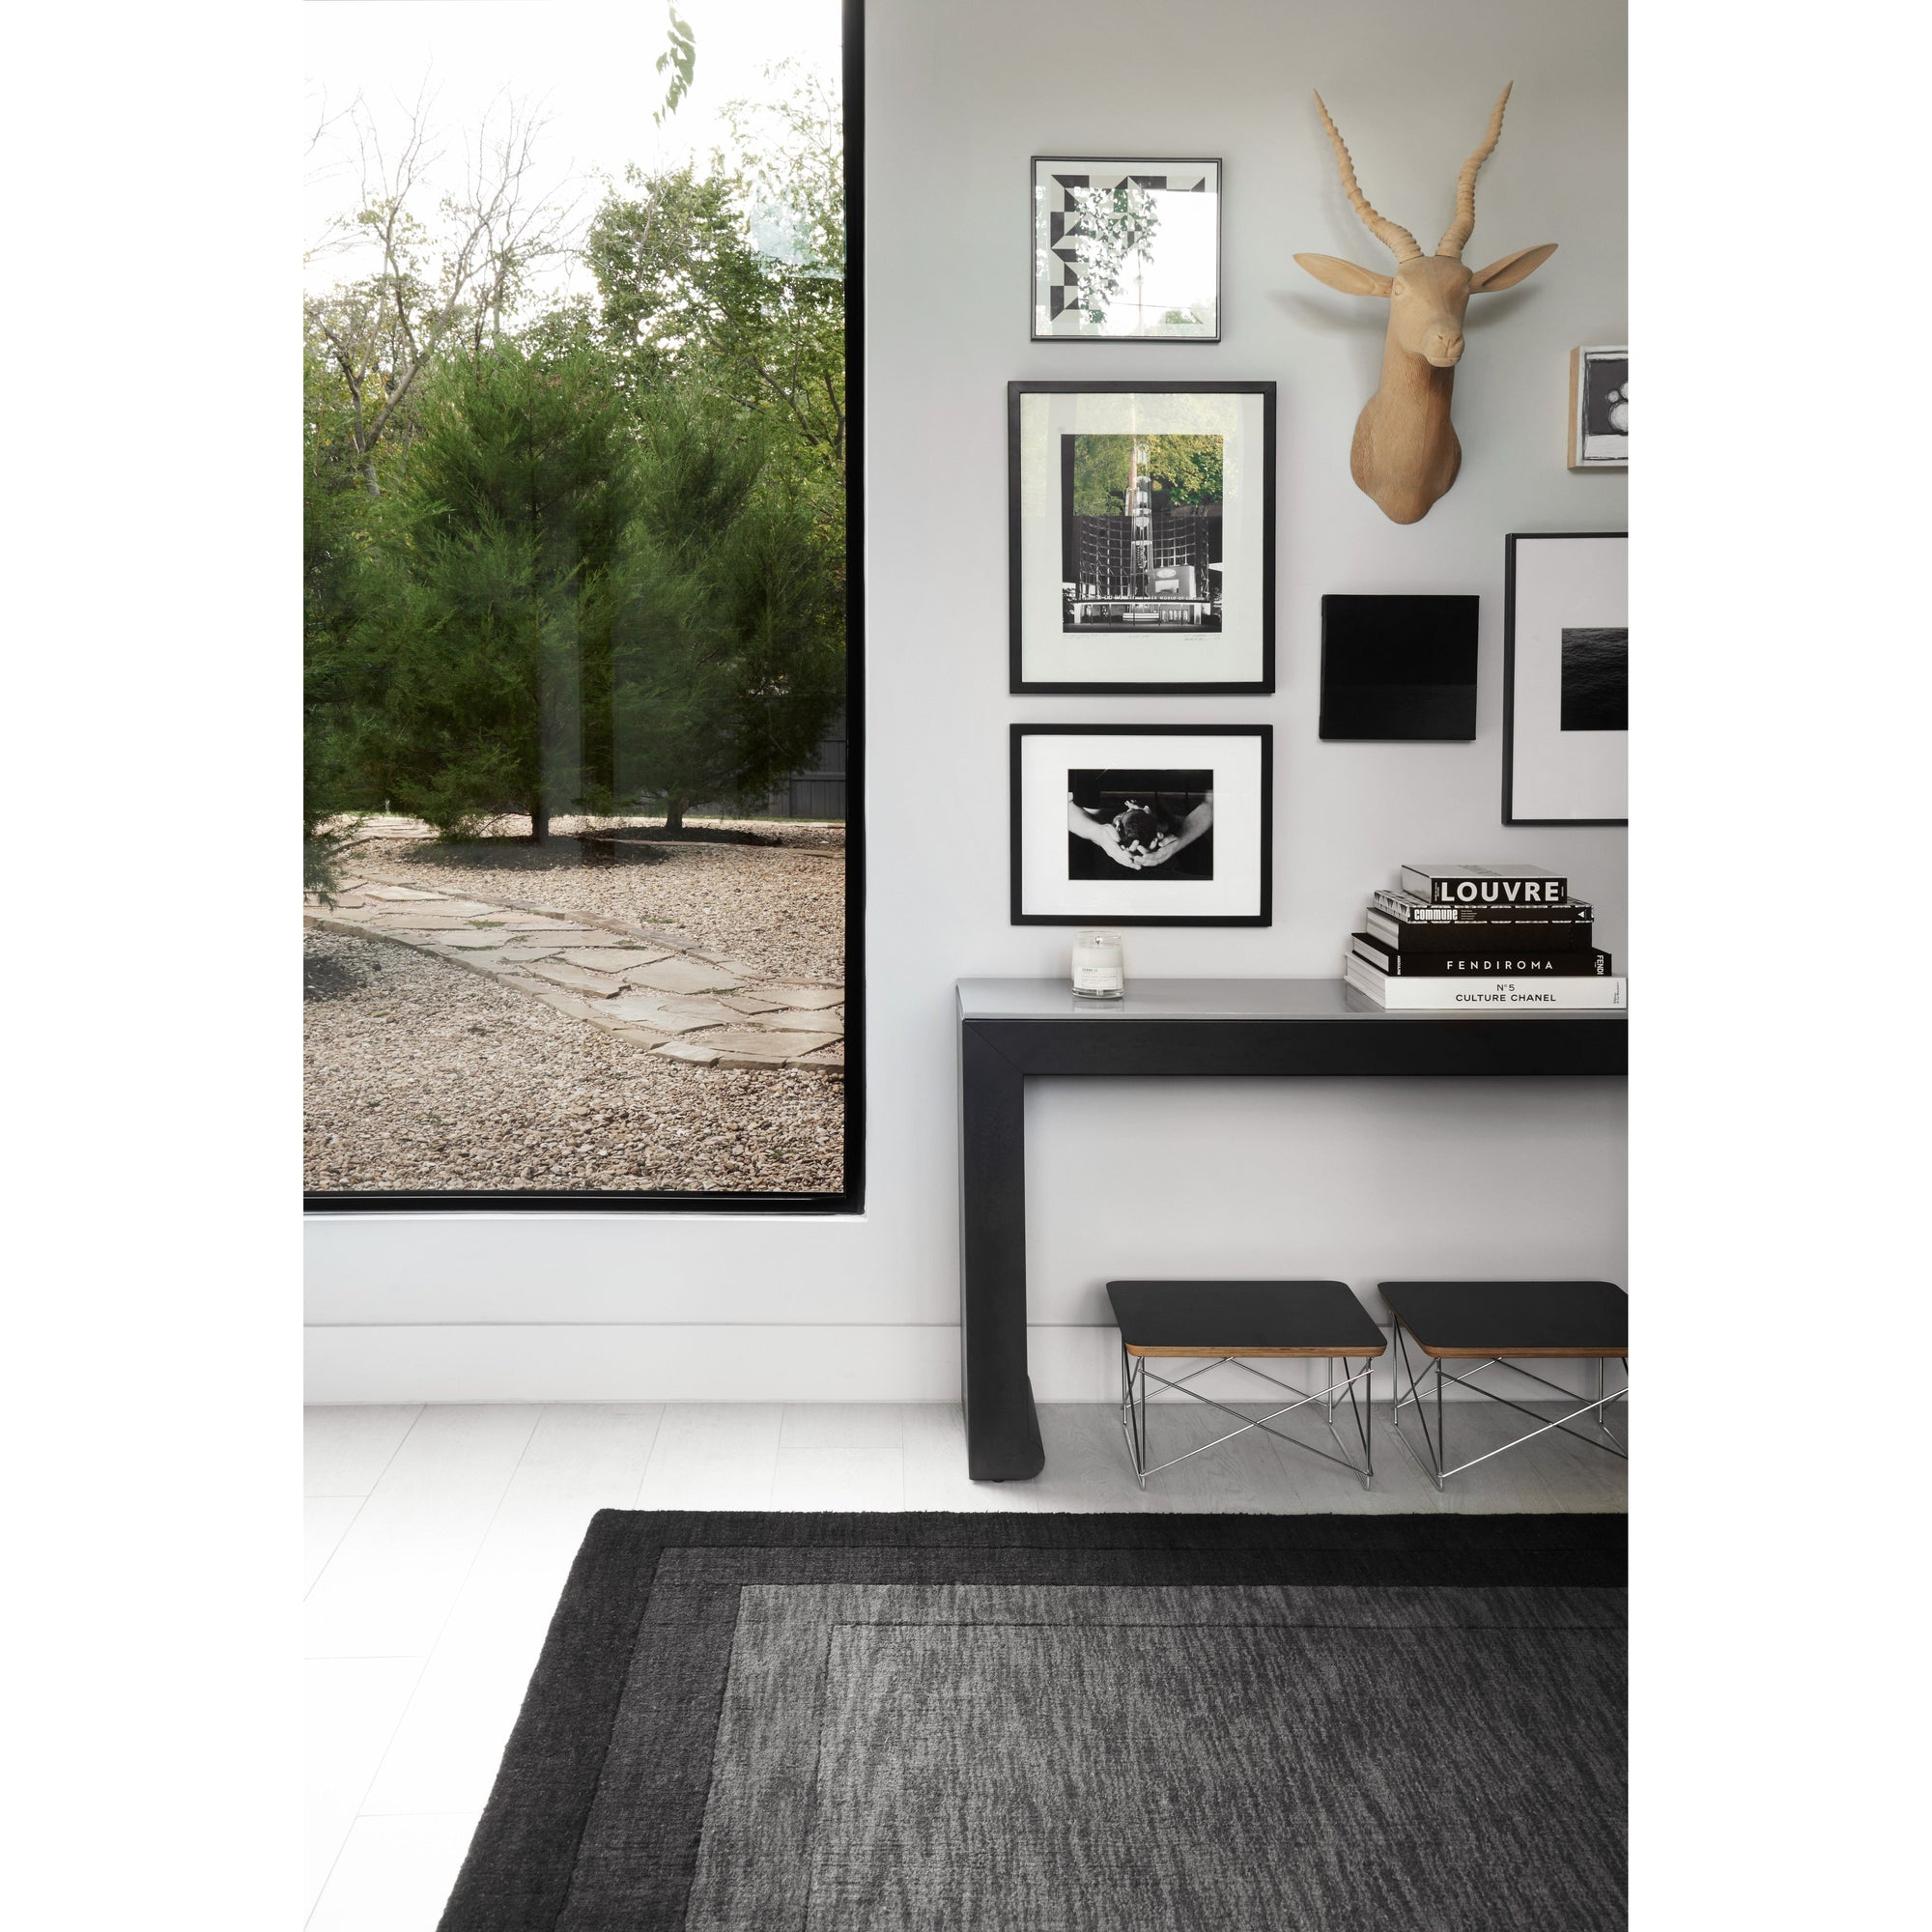 Rugs by Roo Loloi Hamilton Grey Charcoal Area Rug in size 18" x 18" Sample